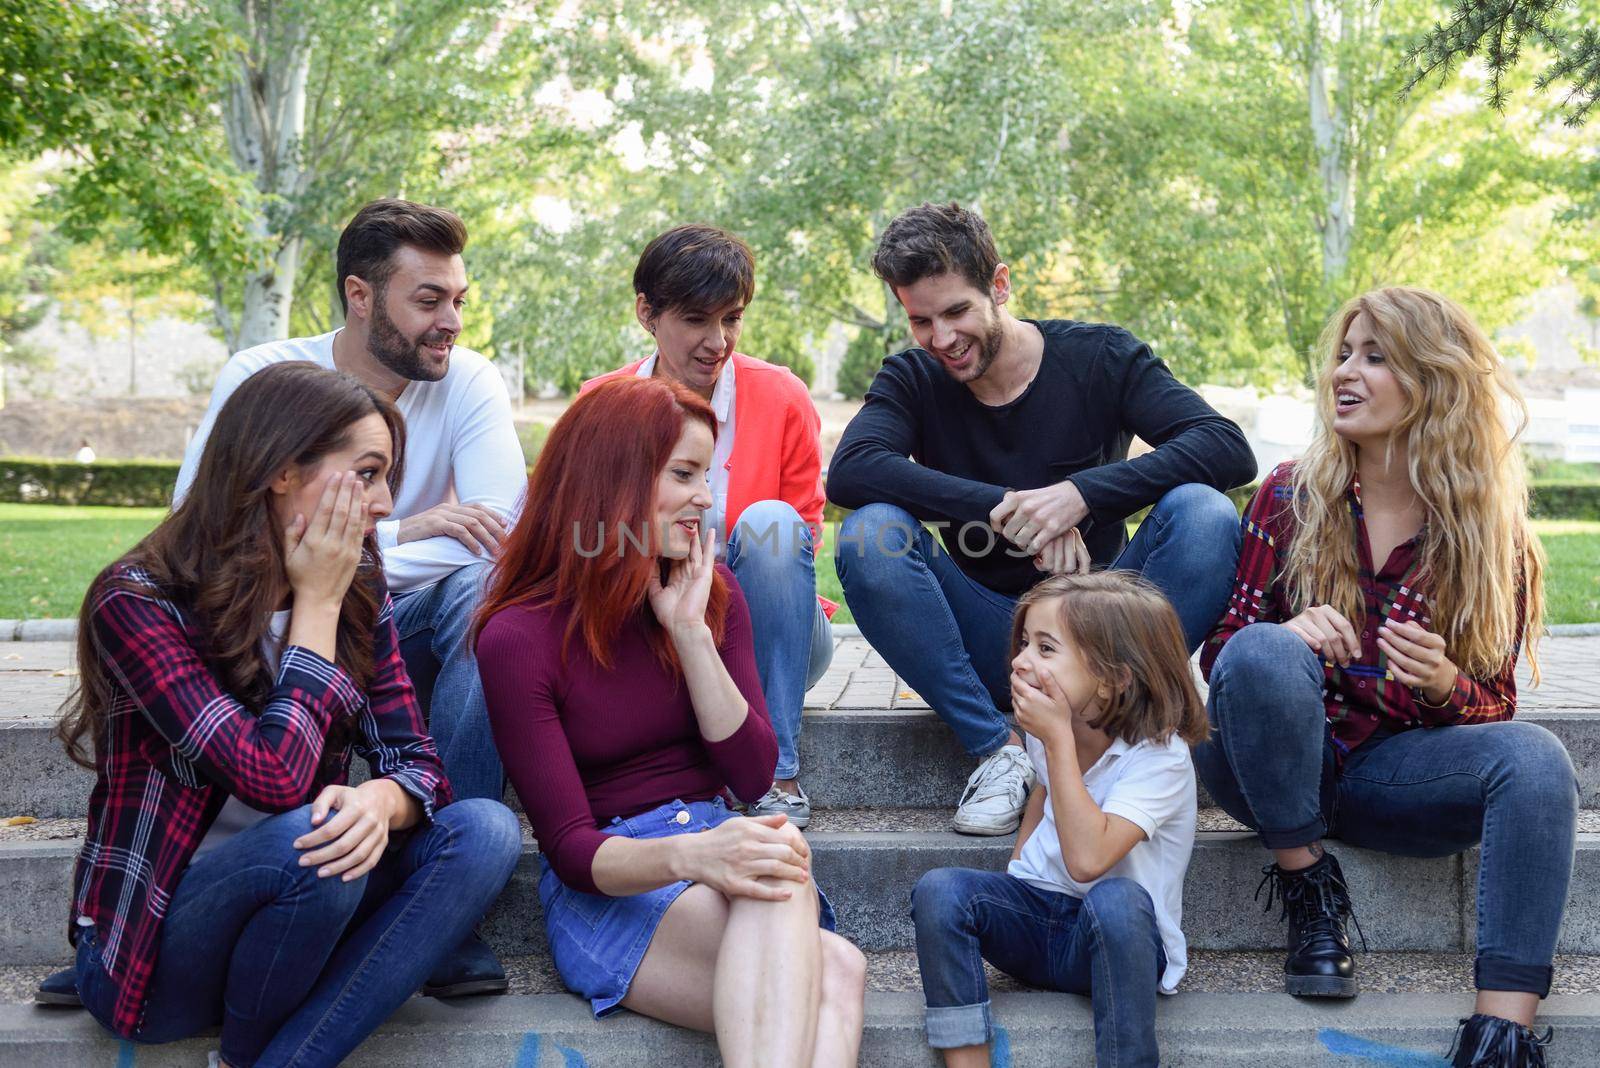 Young people together withe a little girl talking outdoors in urban background. Women and men sitting on stairs in the street wearing casual clothes.